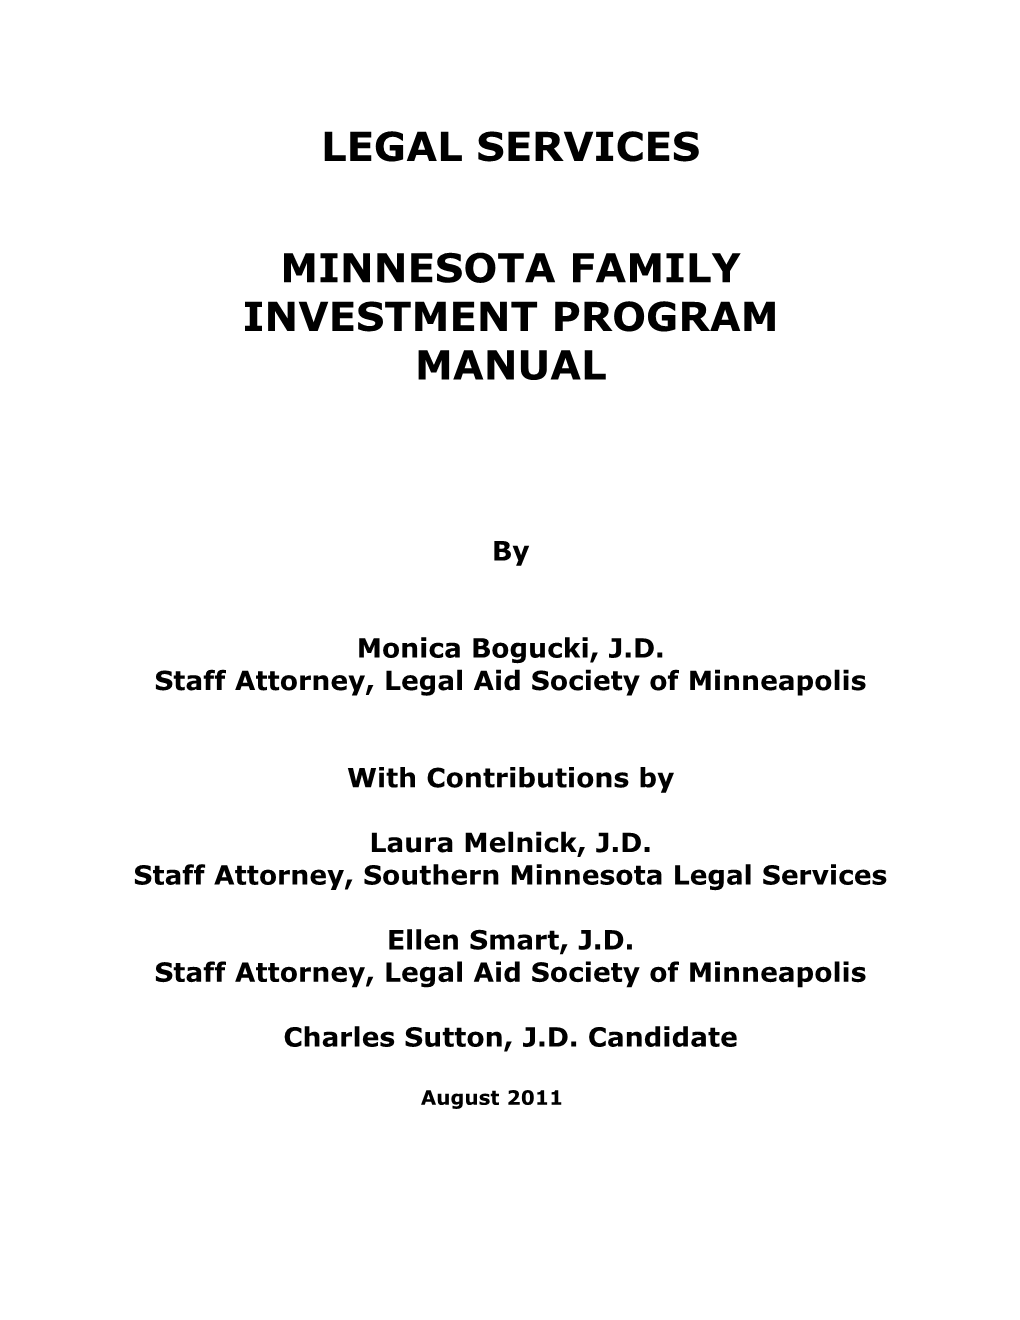 Staff Attorney, Legal Aid Society of Minneapolis